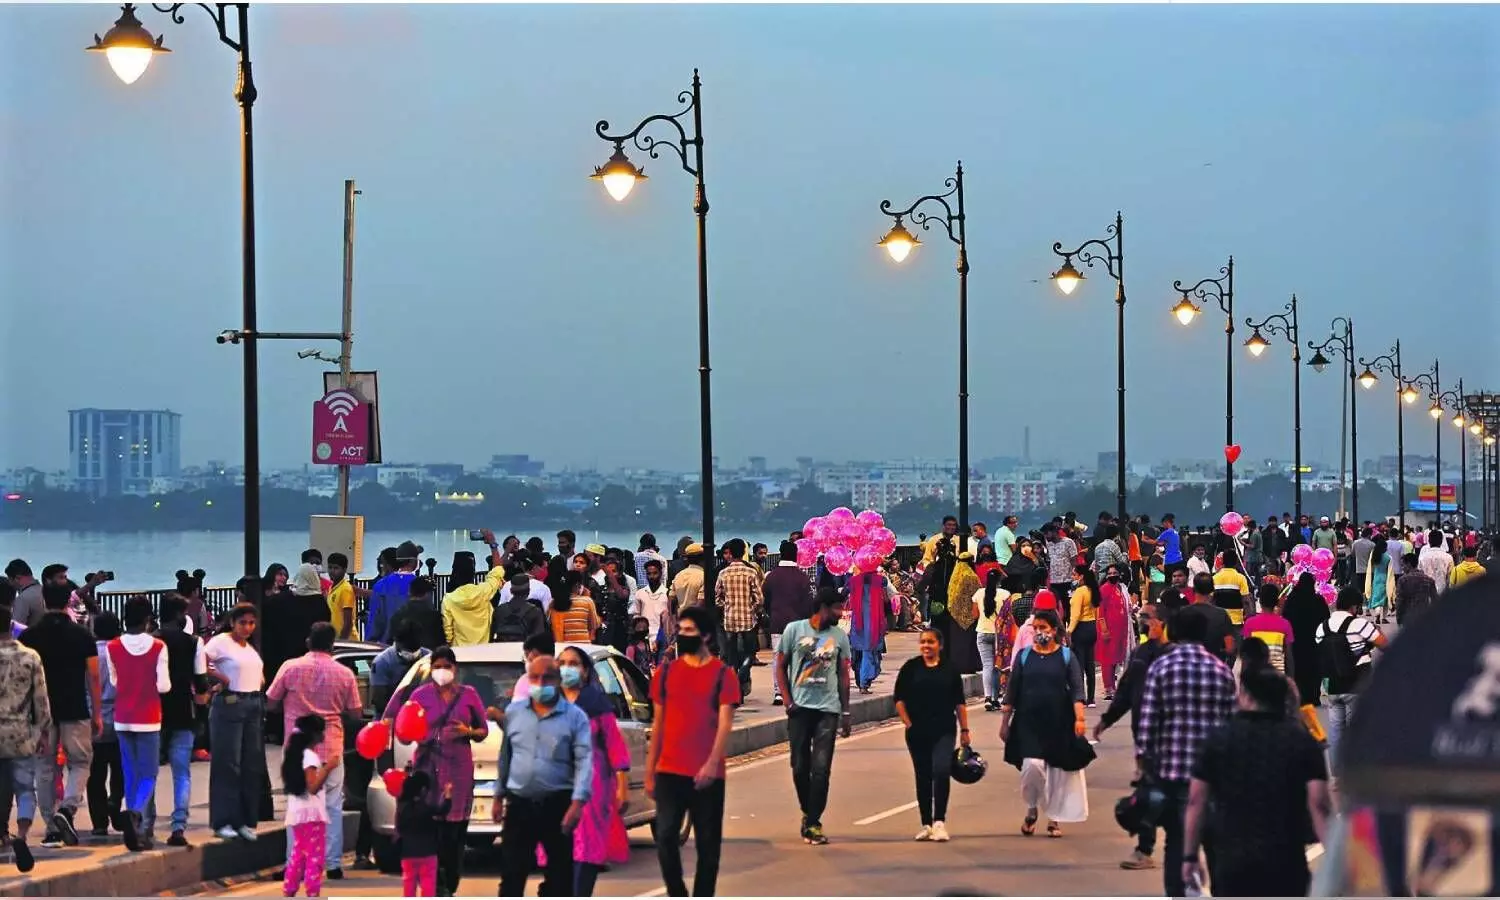 Come Sunday, Tank Bund will come alive with music and dance